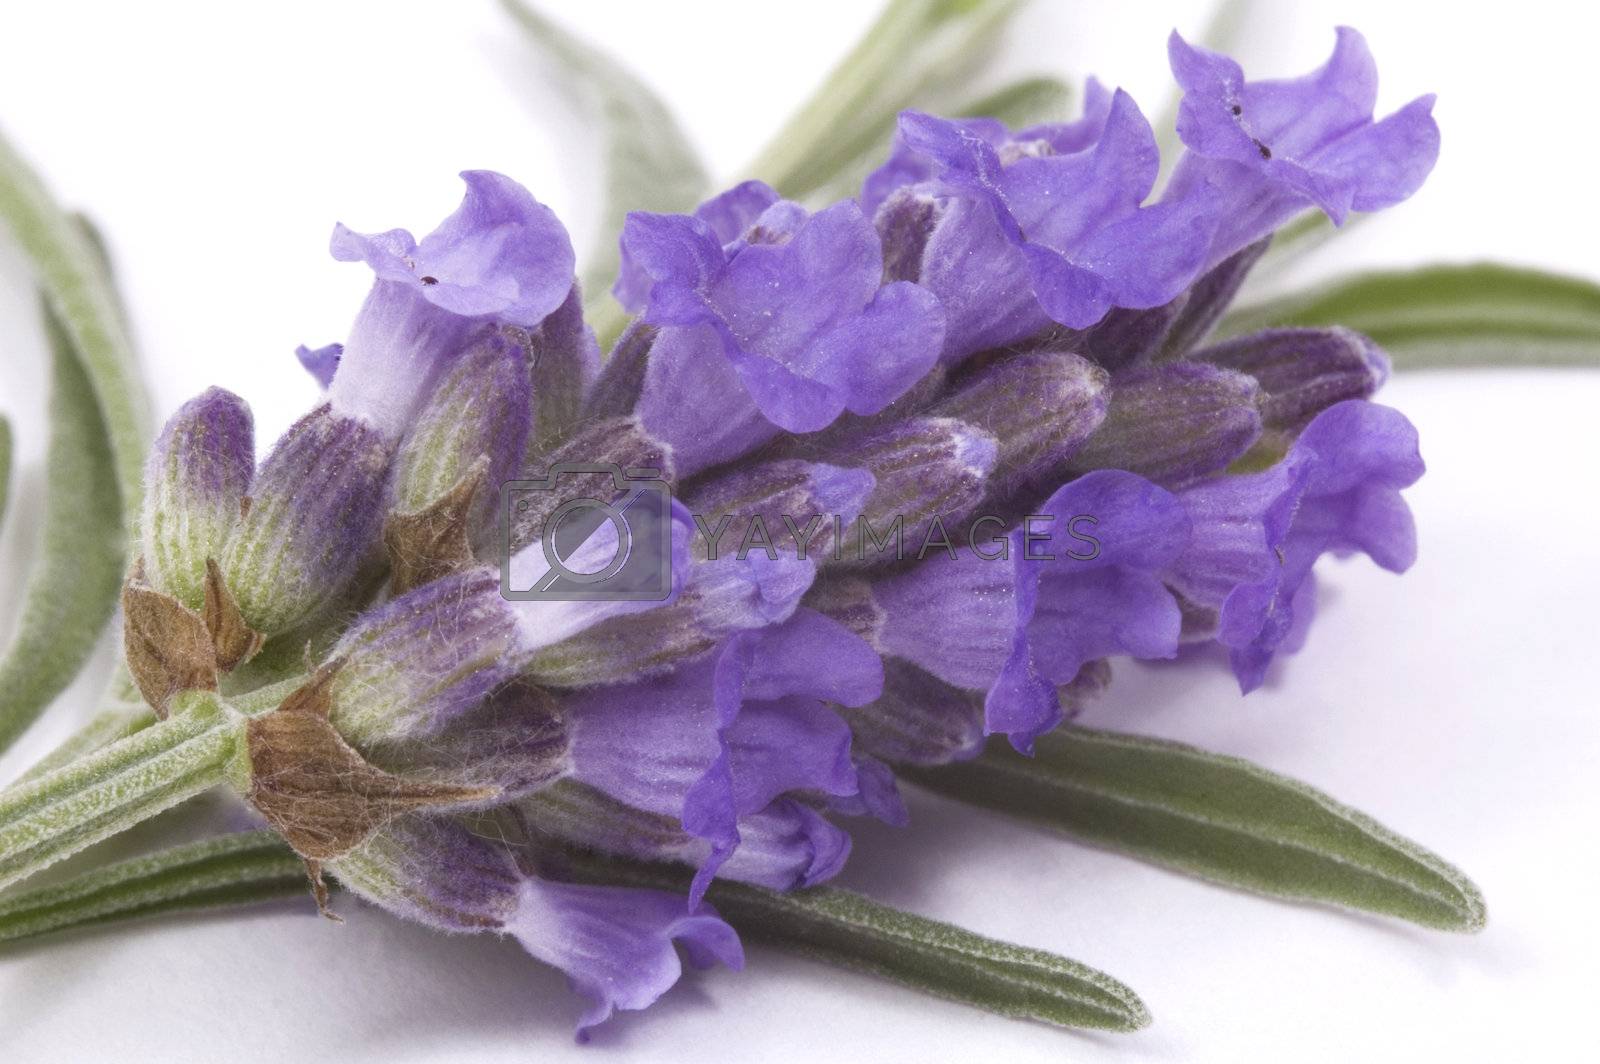 Royalty free image of lavender by joannawnuk